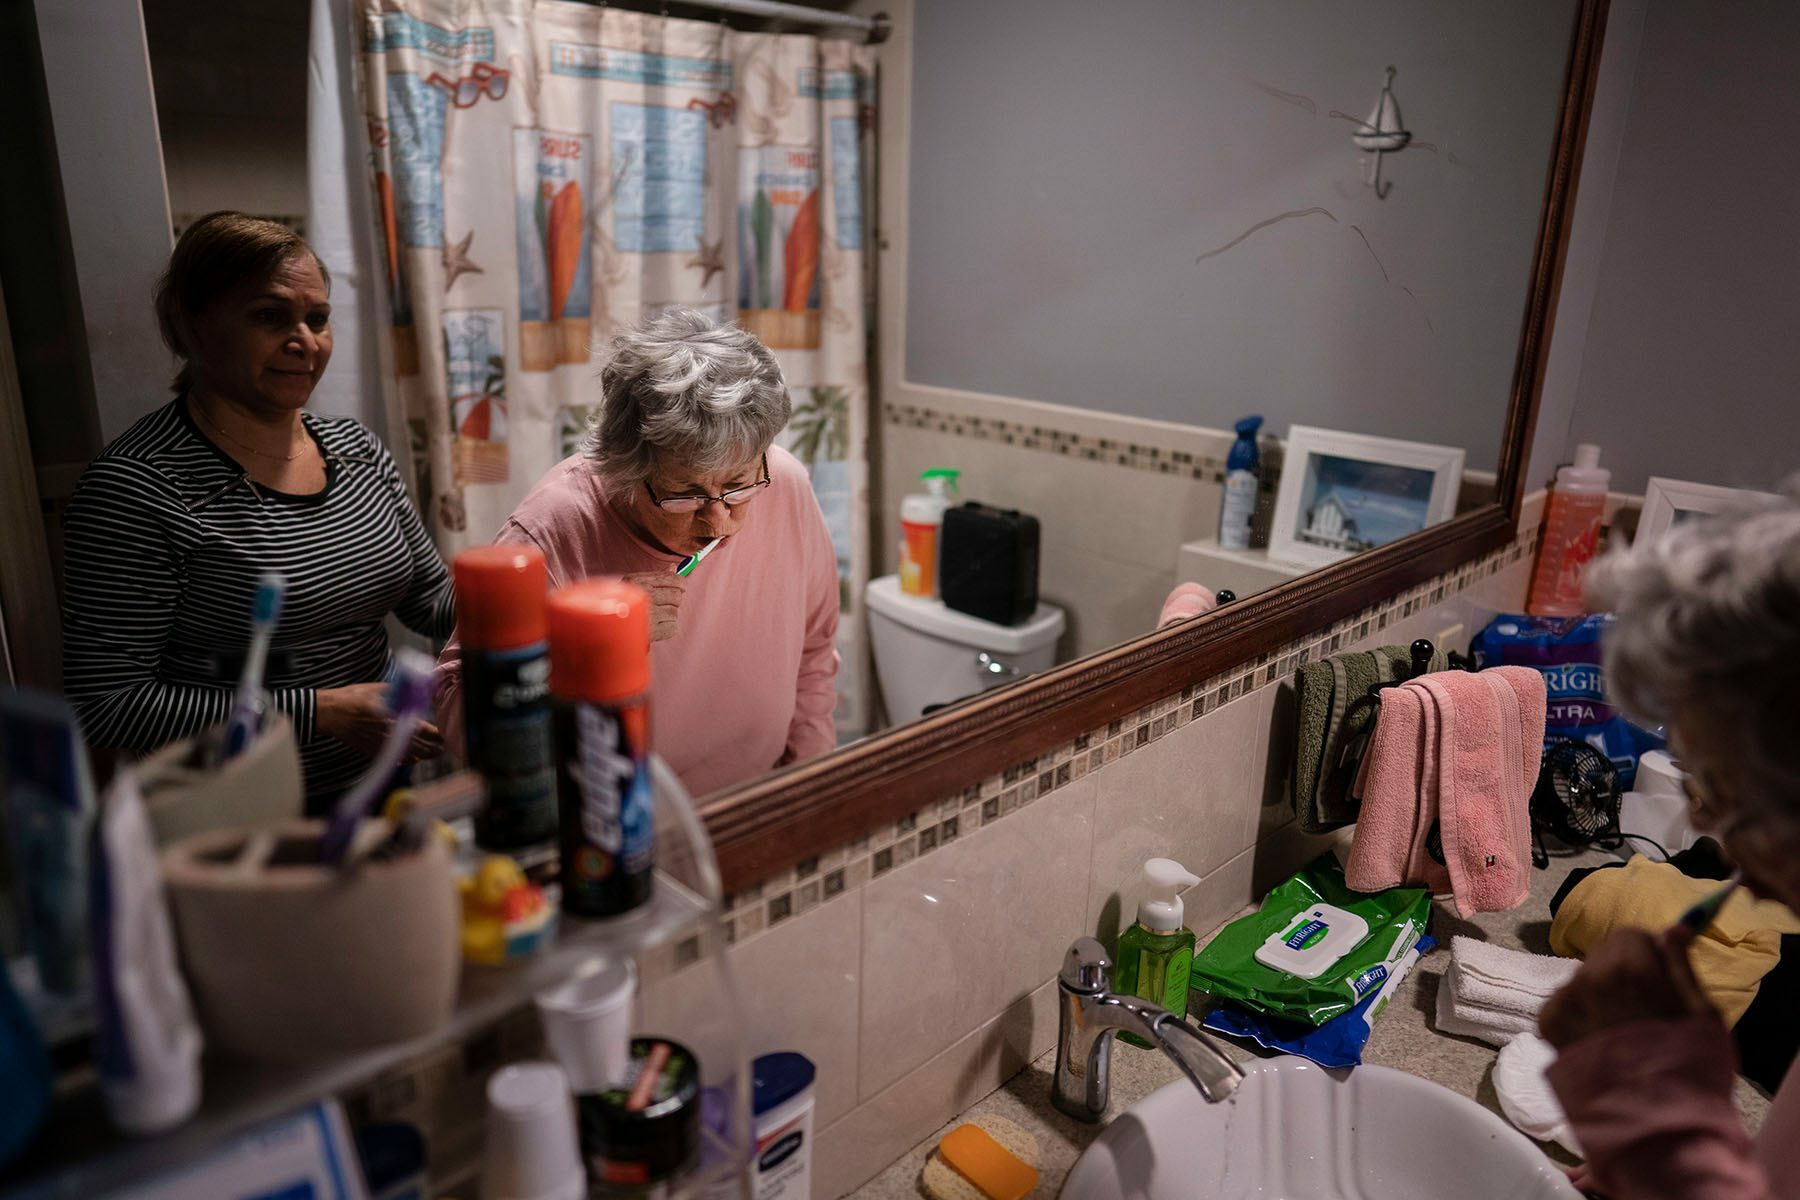 A woman is helped by her caregiver as she brushes her teeth.